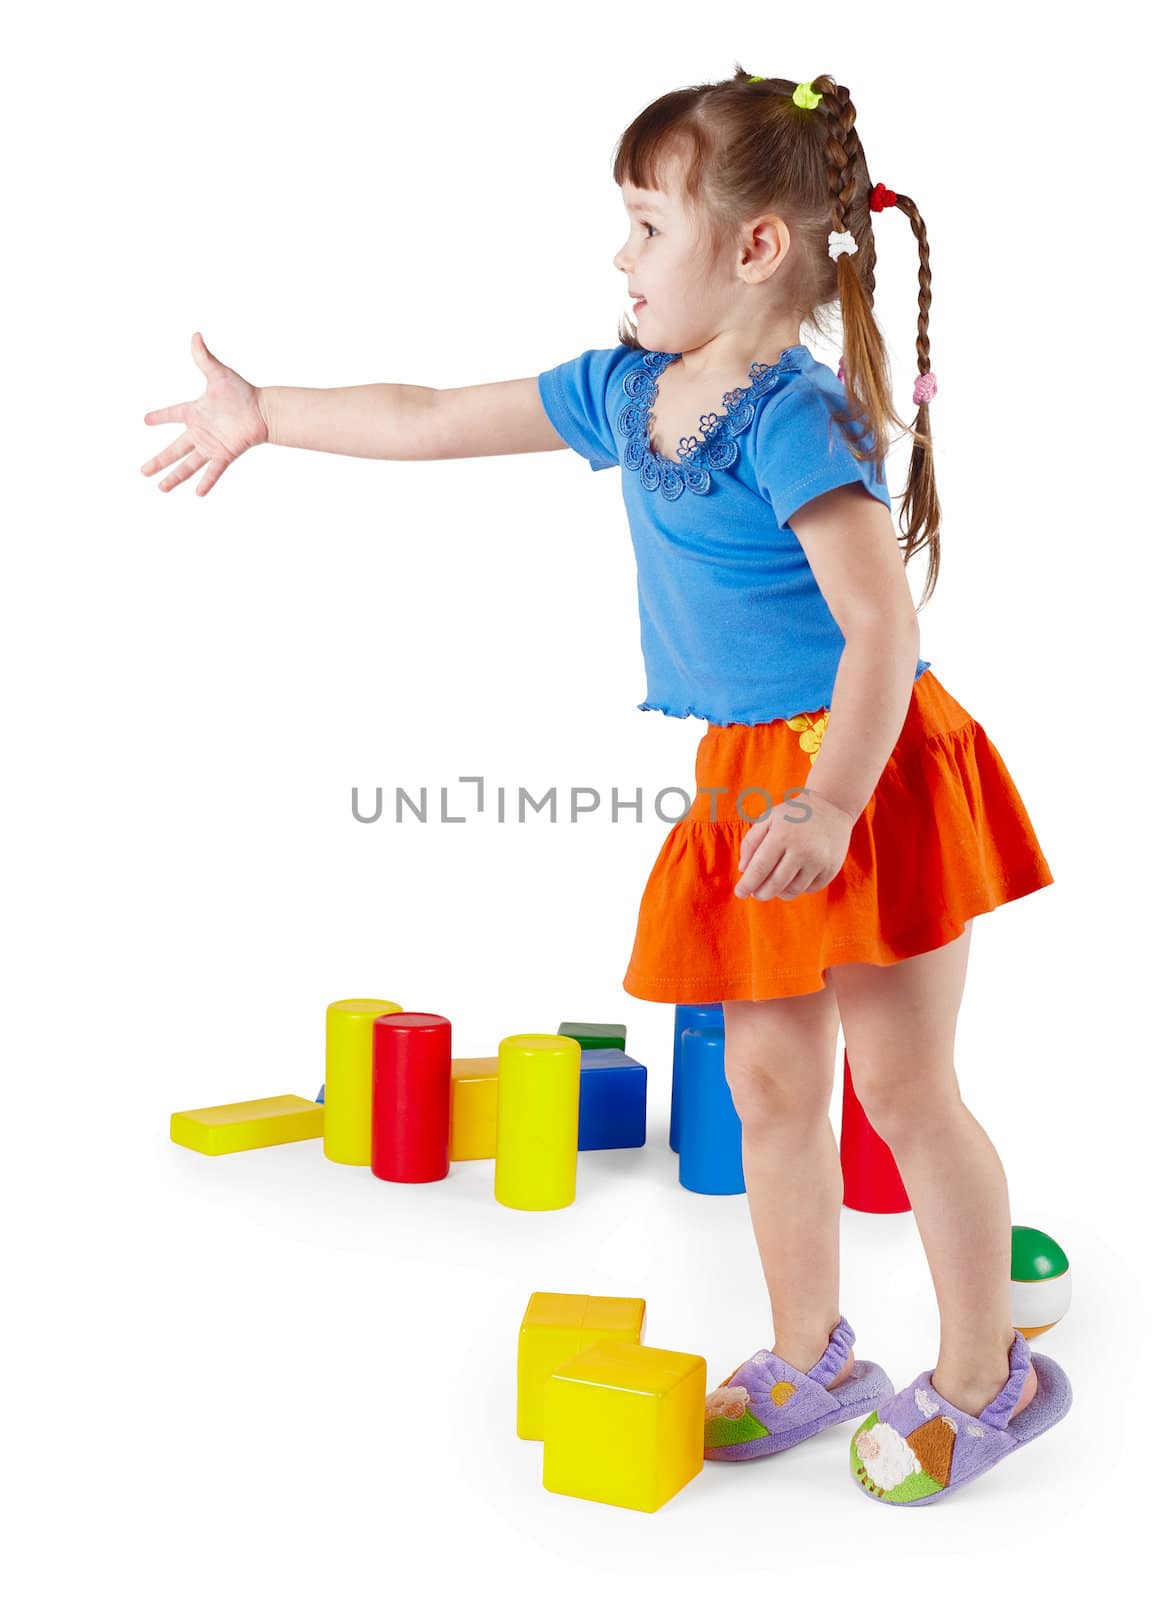 Little girl in dress with toys on white background by pzaxe